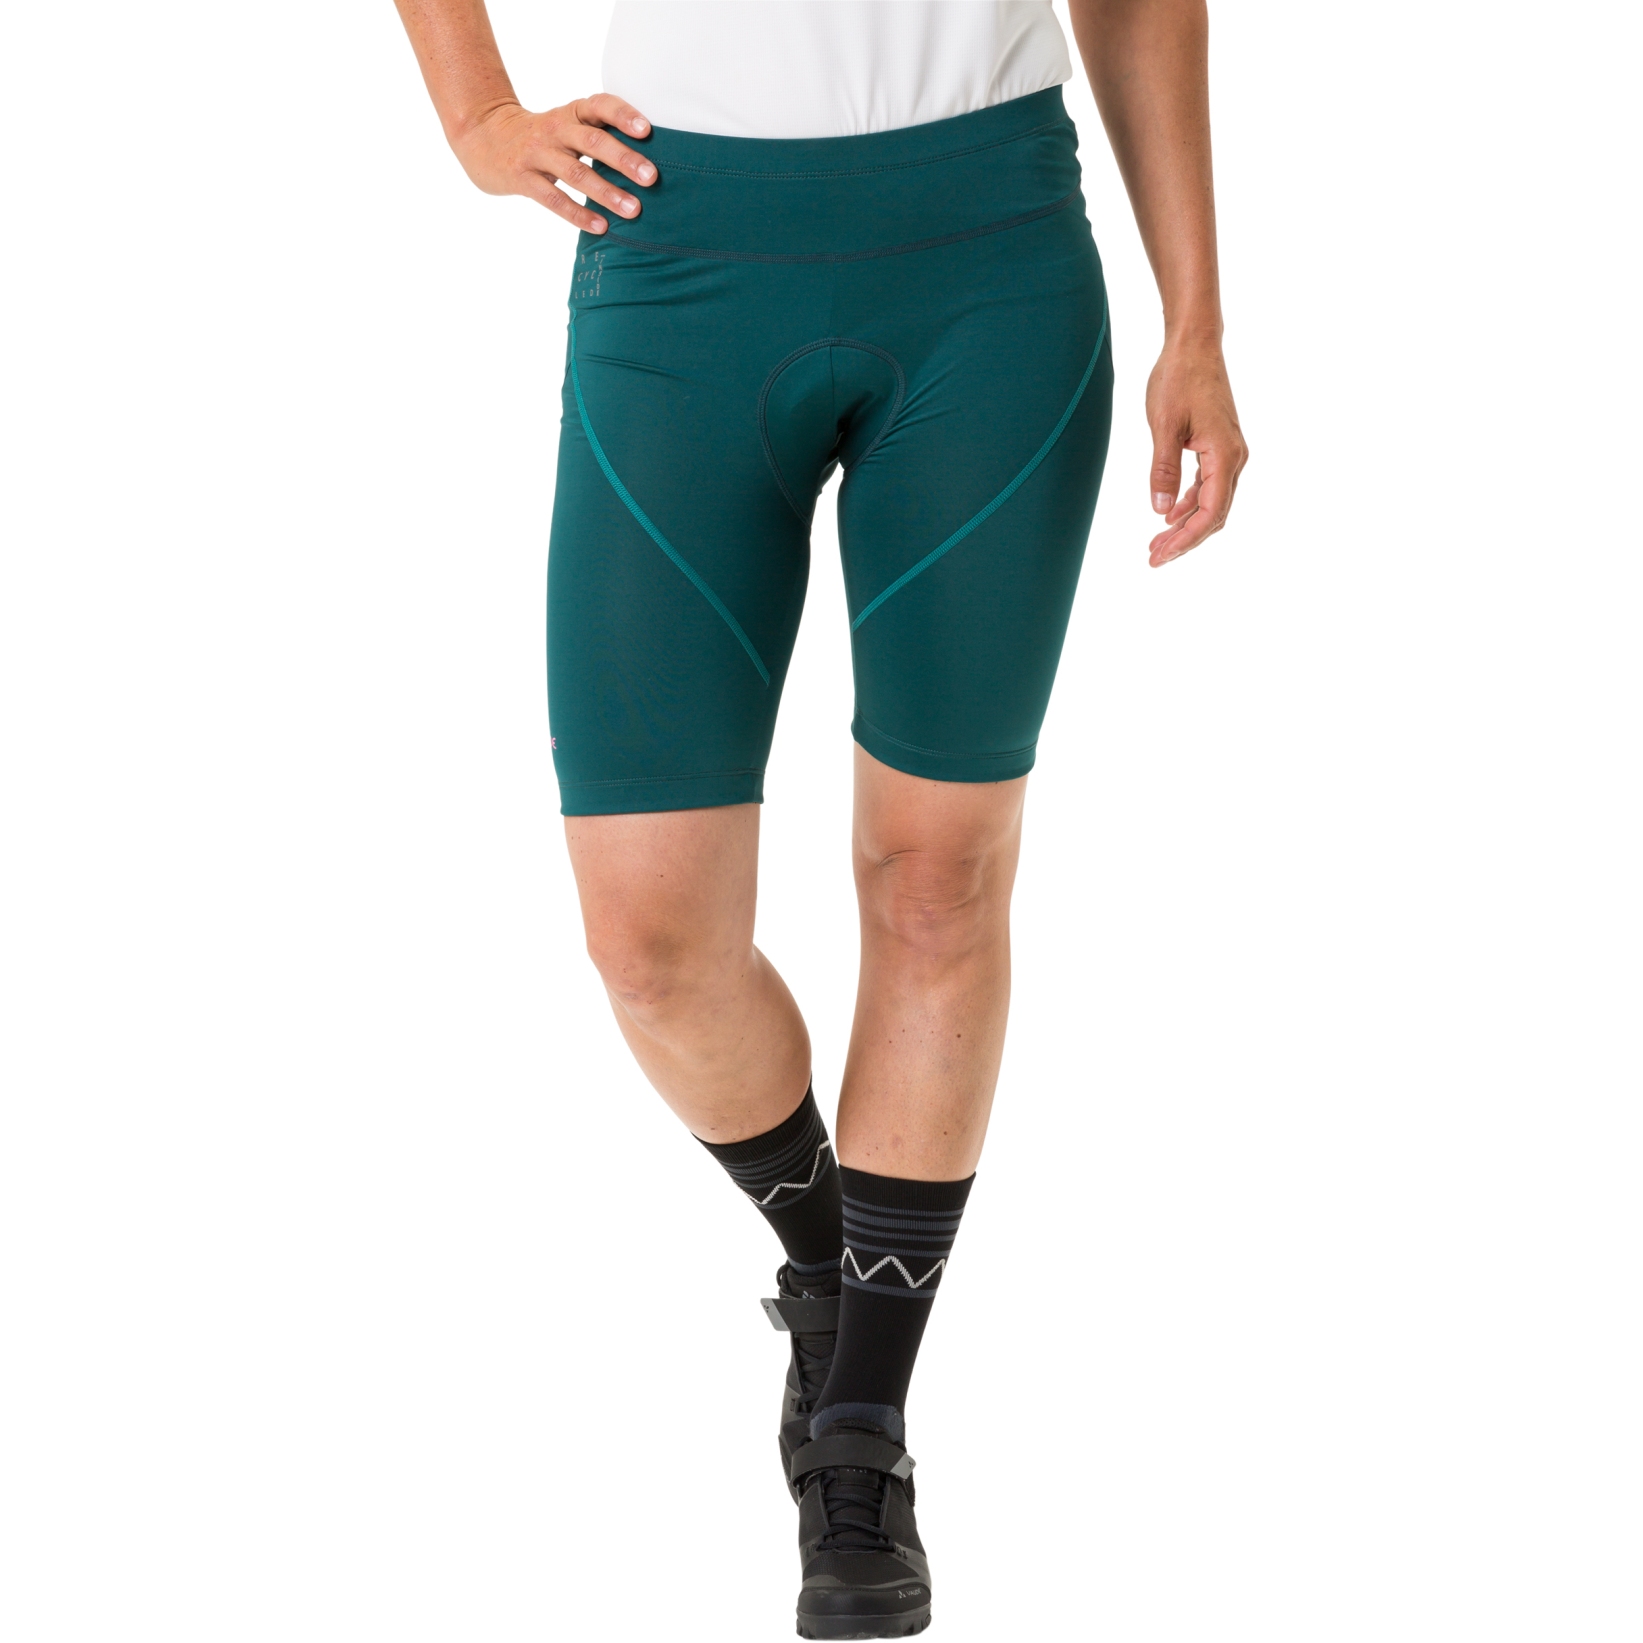 Matera cuissard cycliste homme